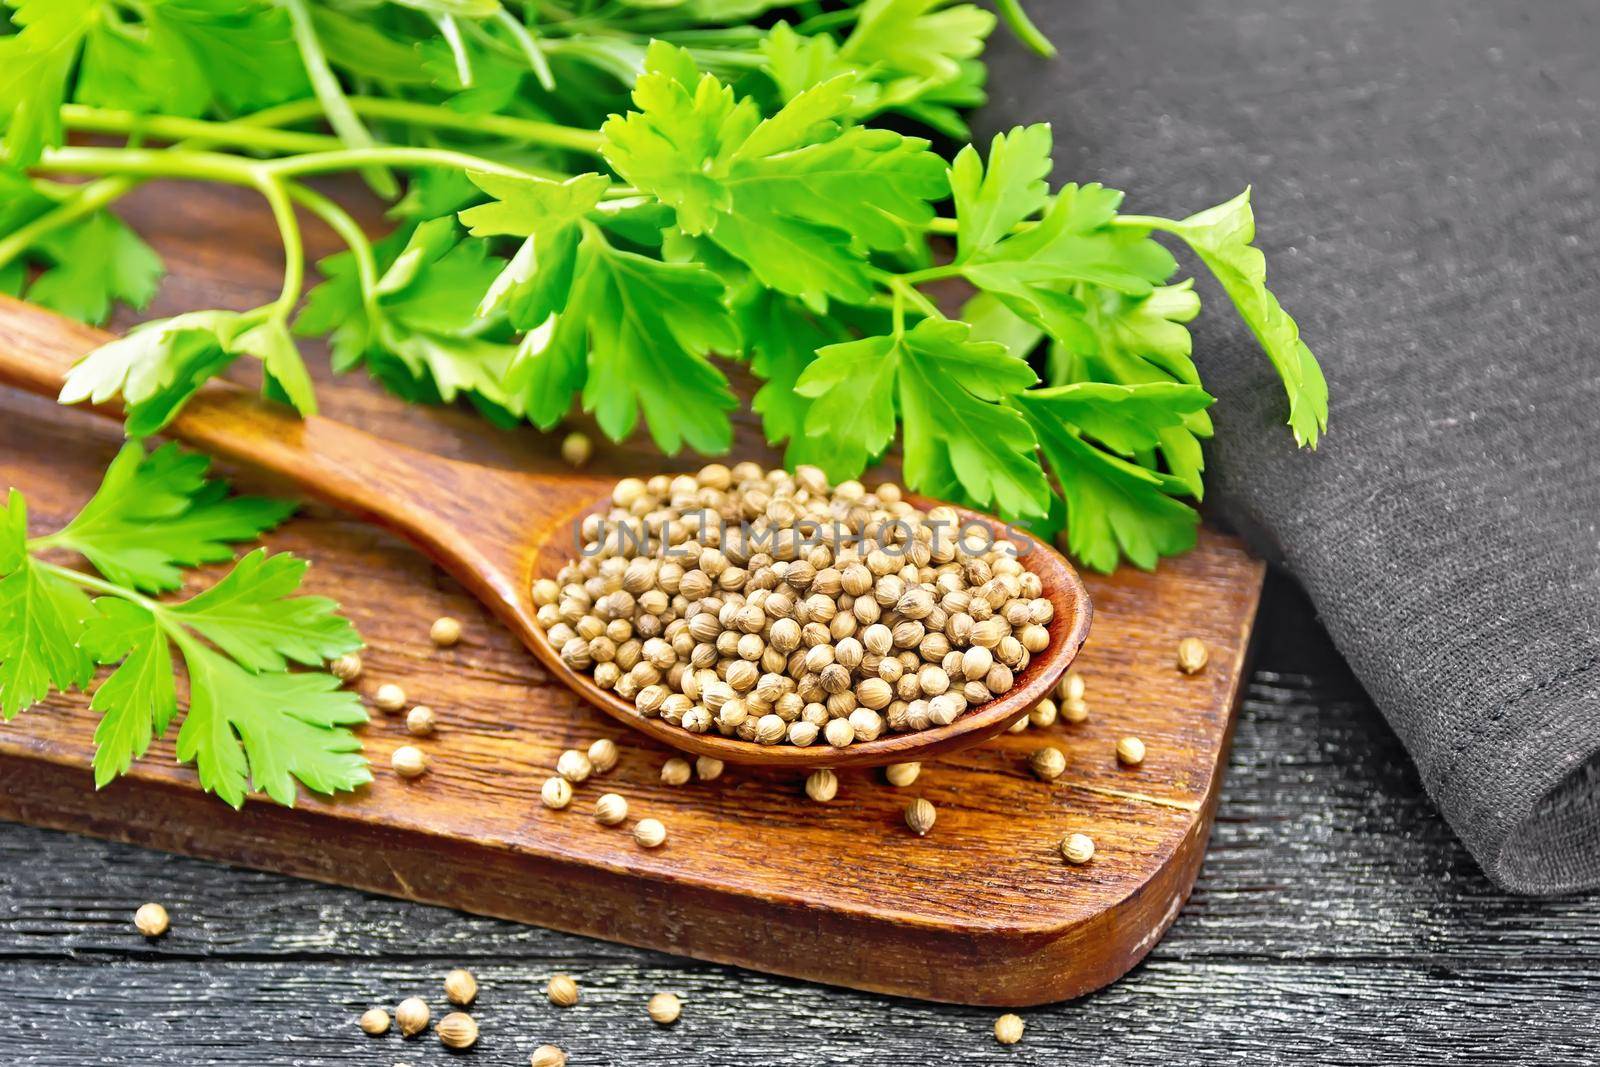 Coriander seeds in a spoon, green fresh cilantro and a napkin on black wooden board background